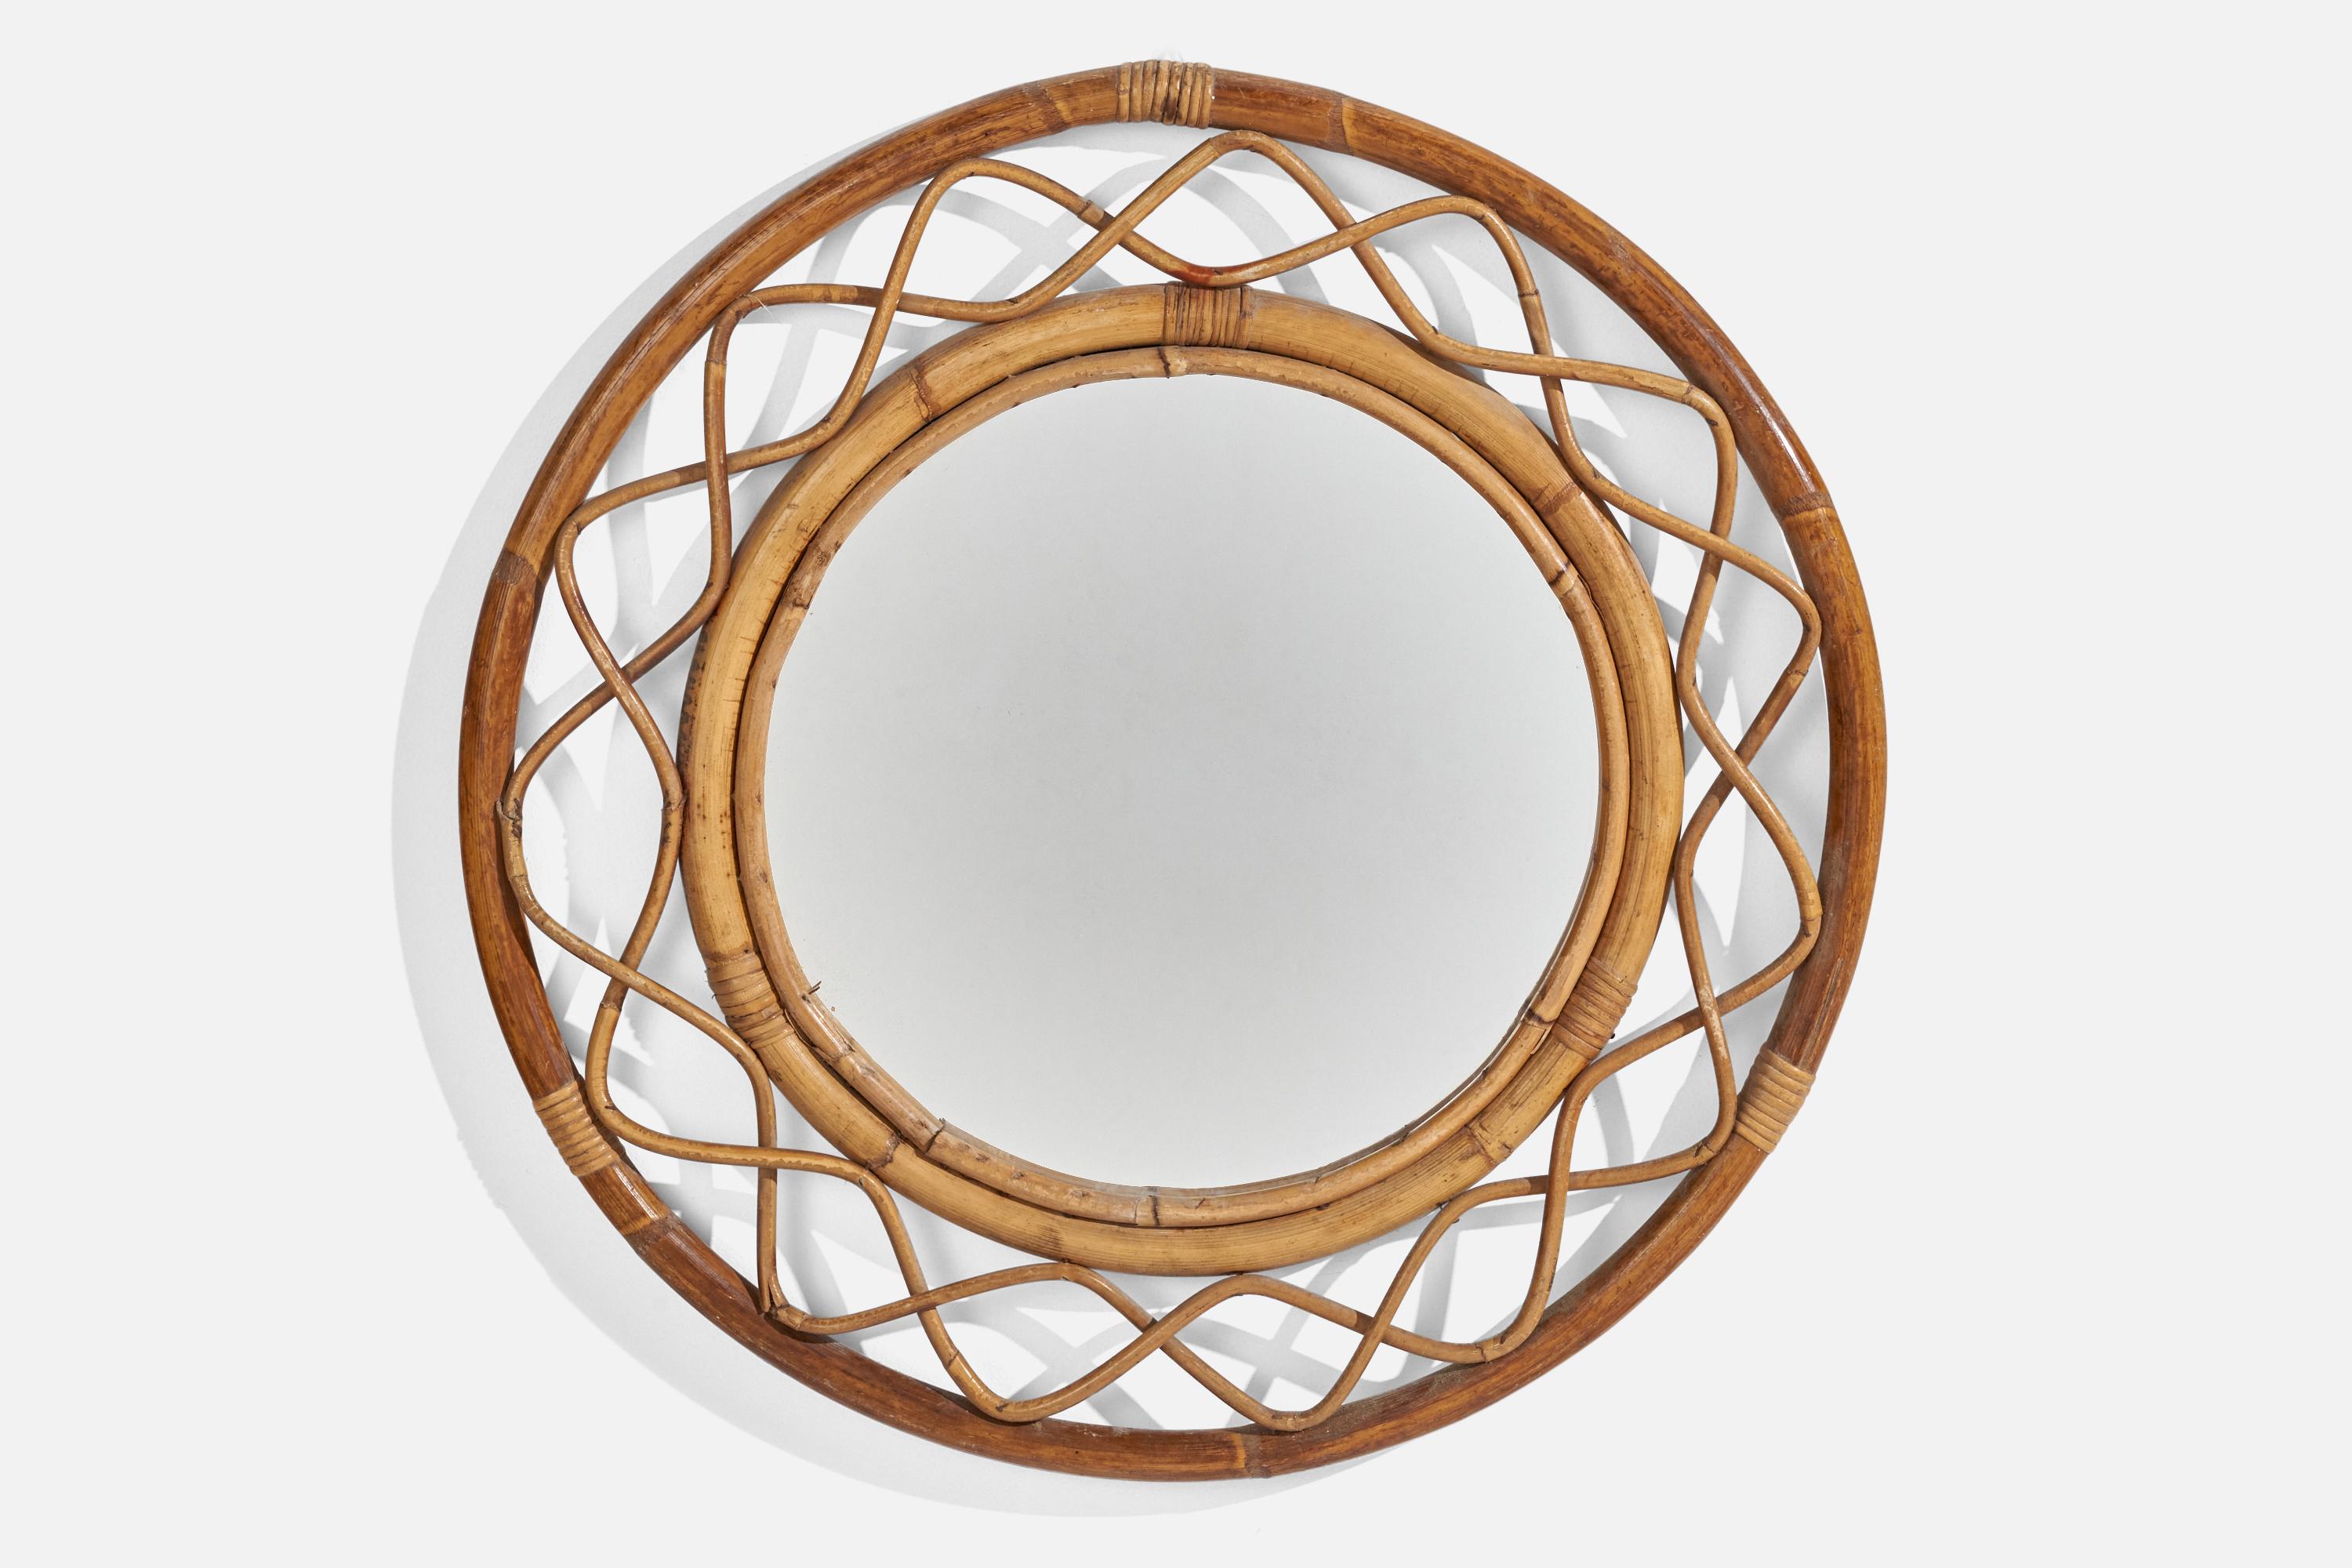 A rattan and bamboo wall mirror designed and produced by an Italian designer, Italy, c. 1960s.
 